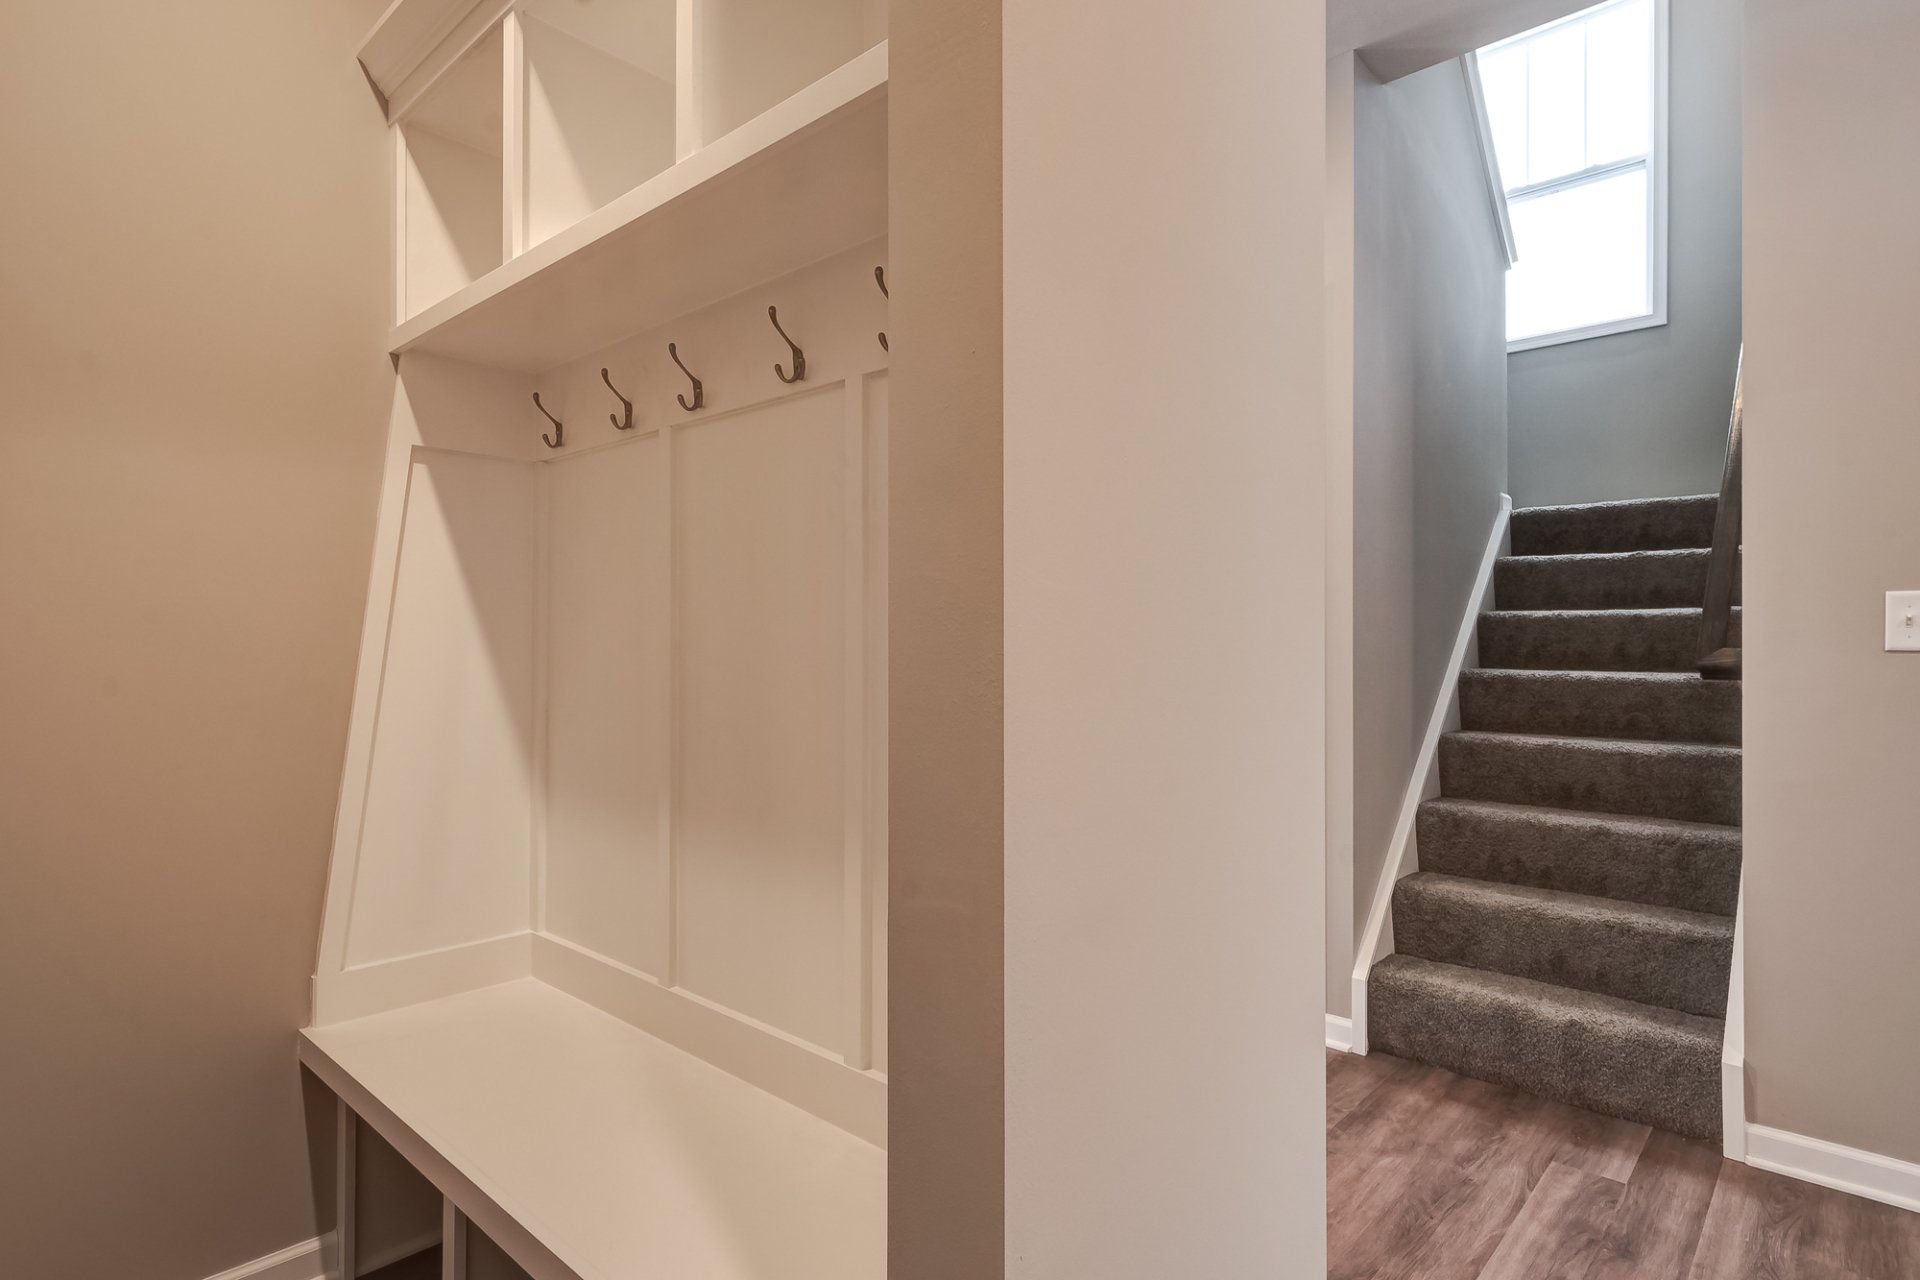 Mudroom with Stairs in Background